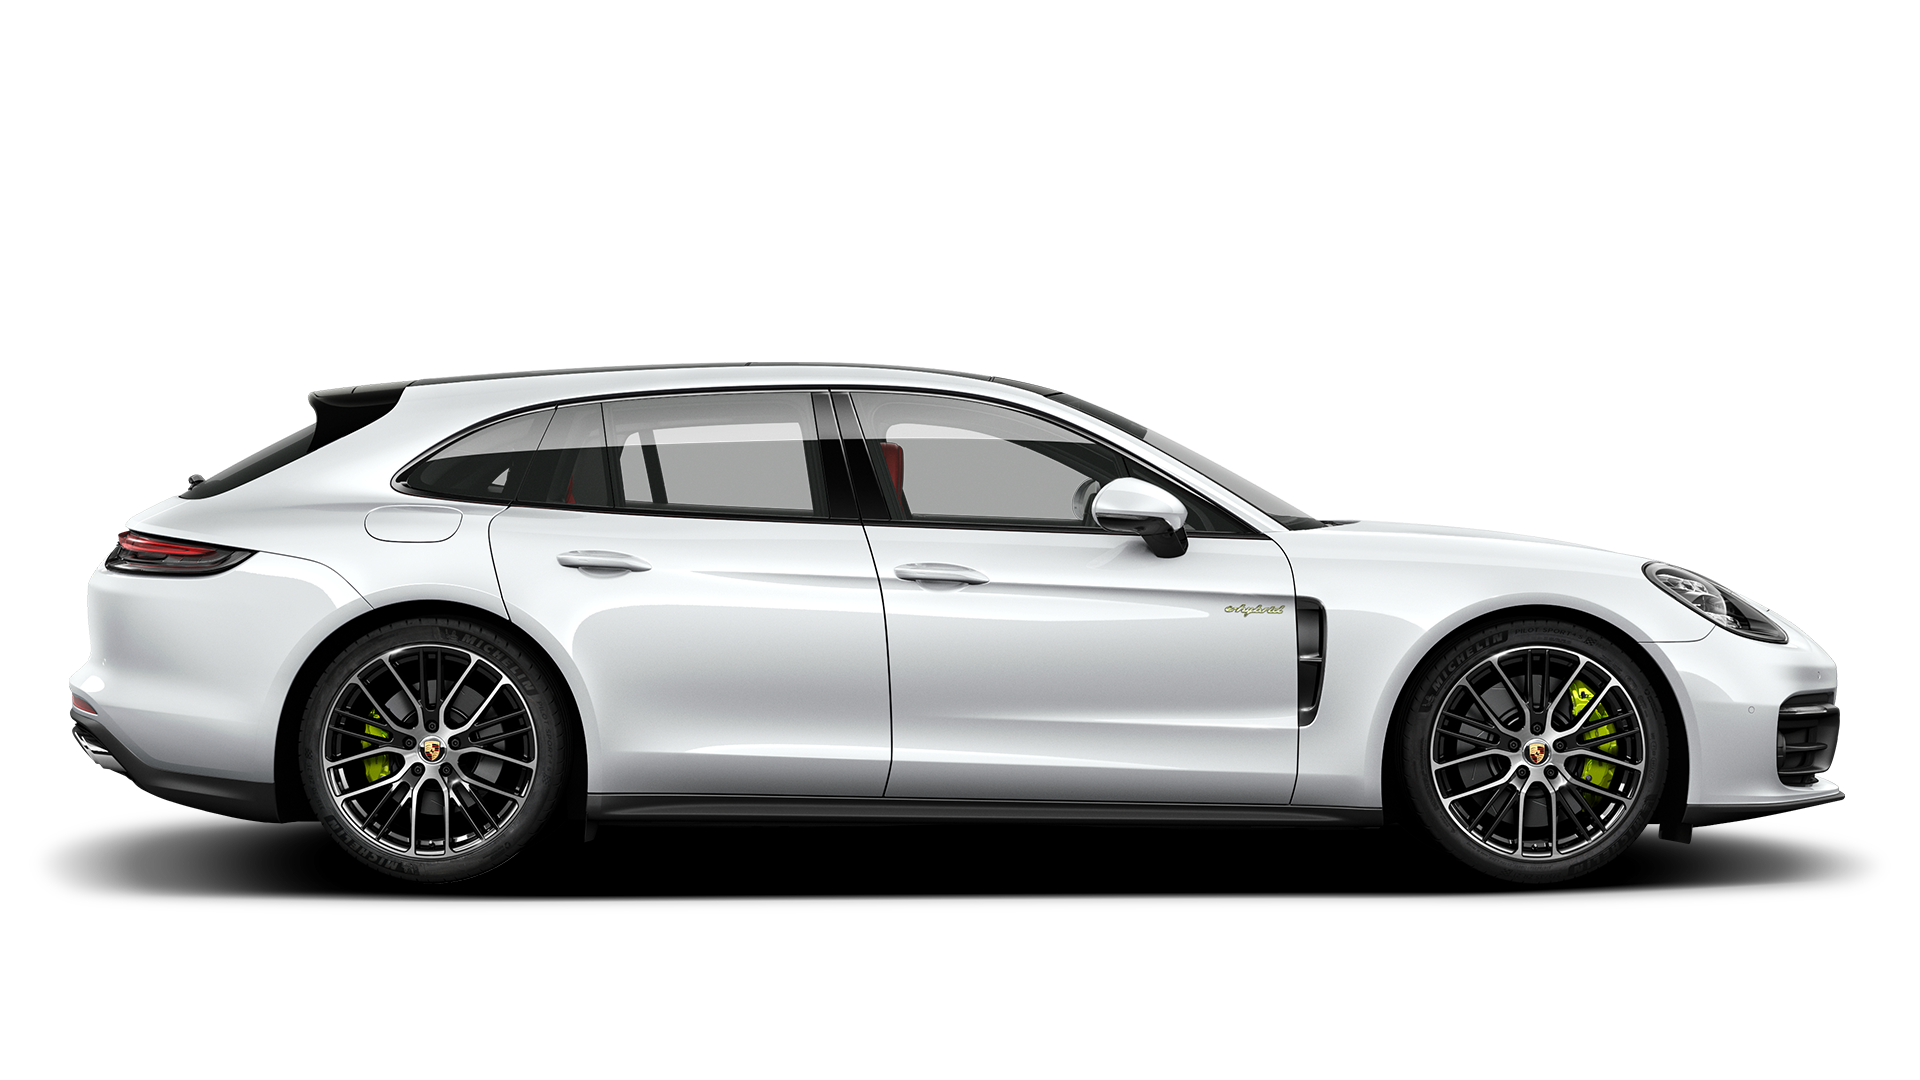 Porsche Panamera series now in India at INR 145 crore  The new Porsches  are here  The Economic Times